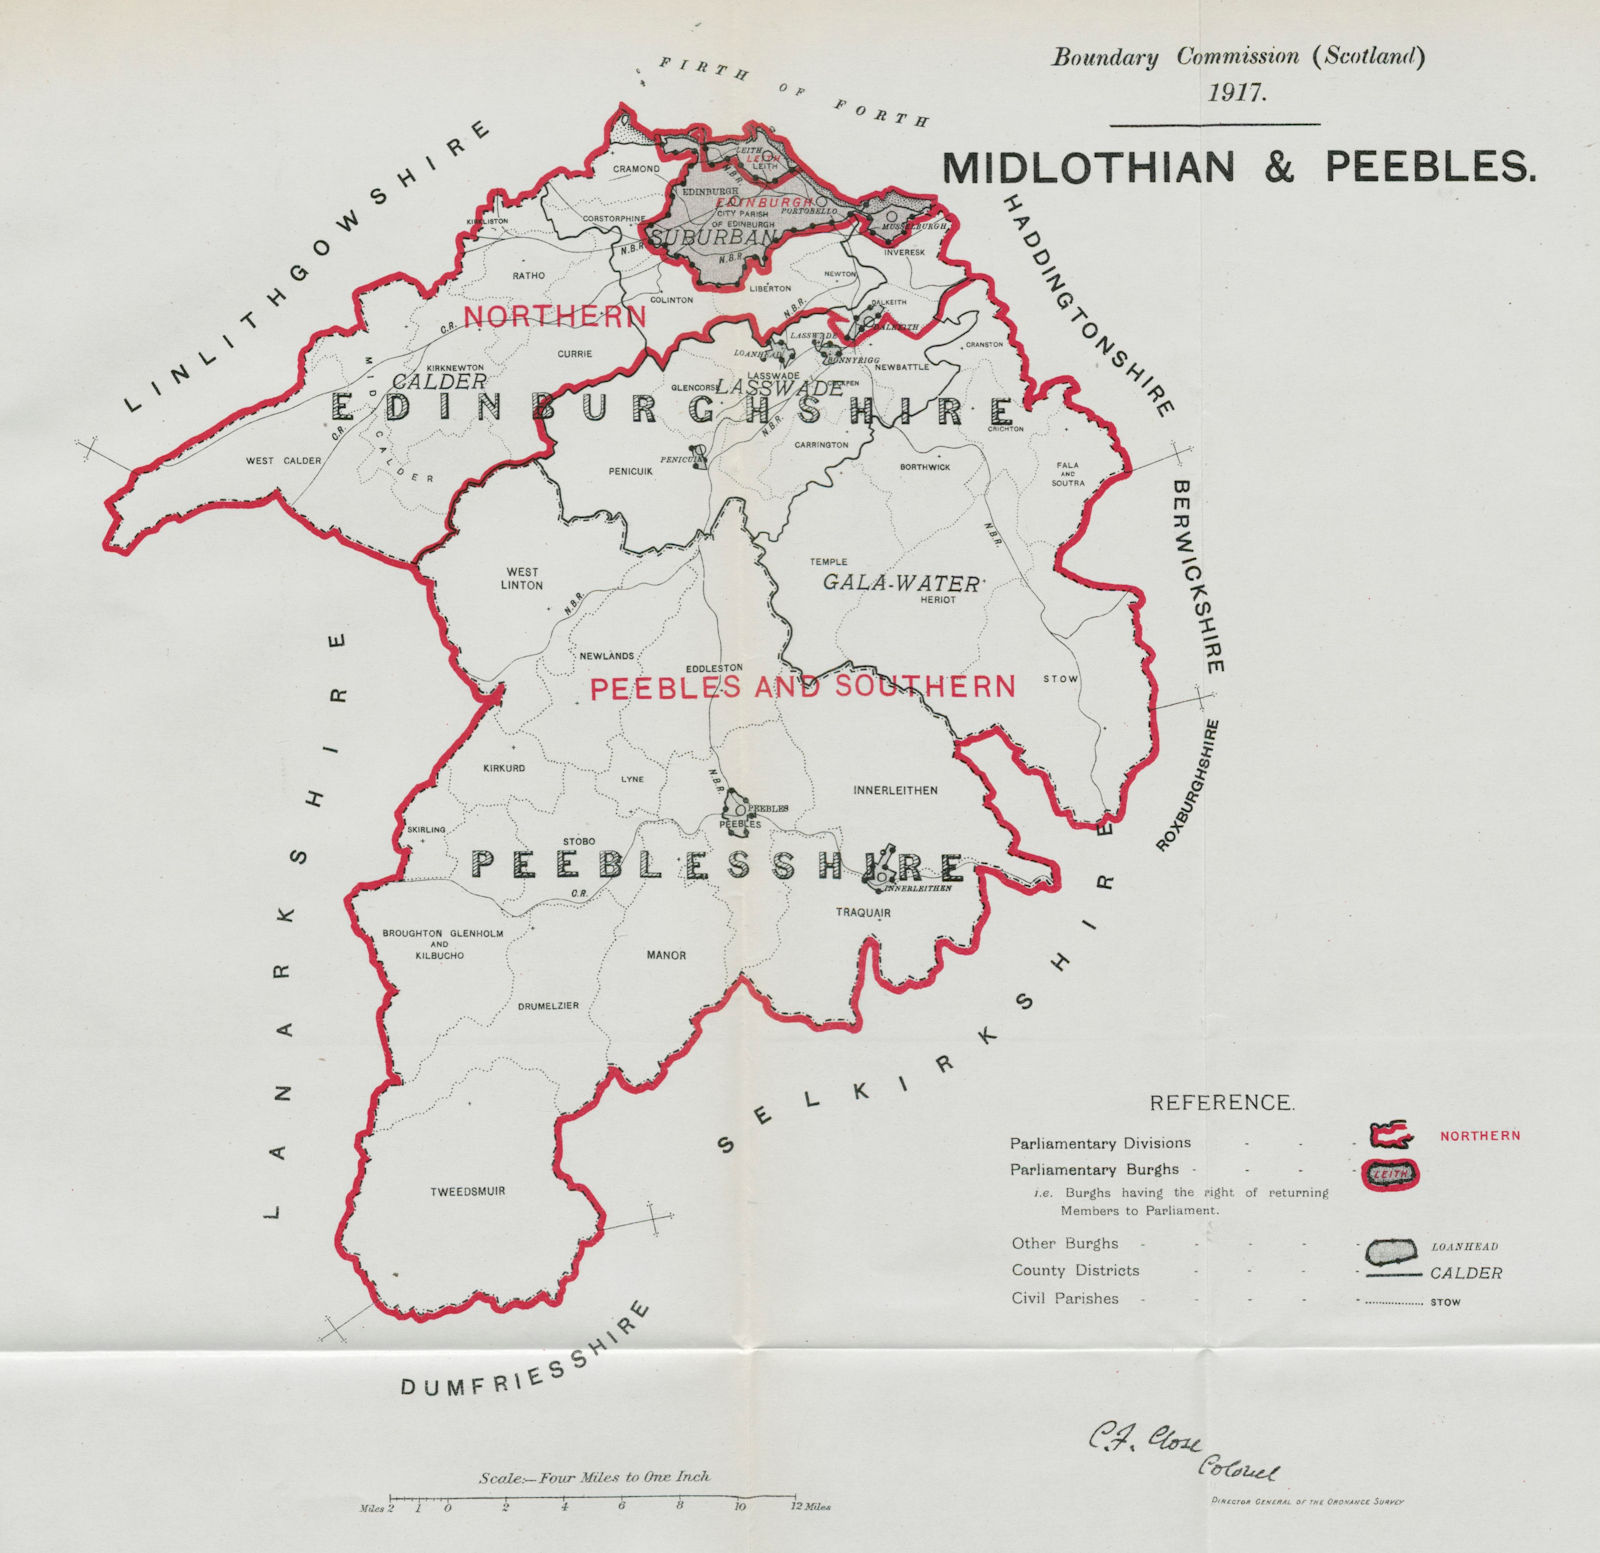 Midlothian & Peebles Parliamentary County. BOUNDARY COMMISSION 1917 old map